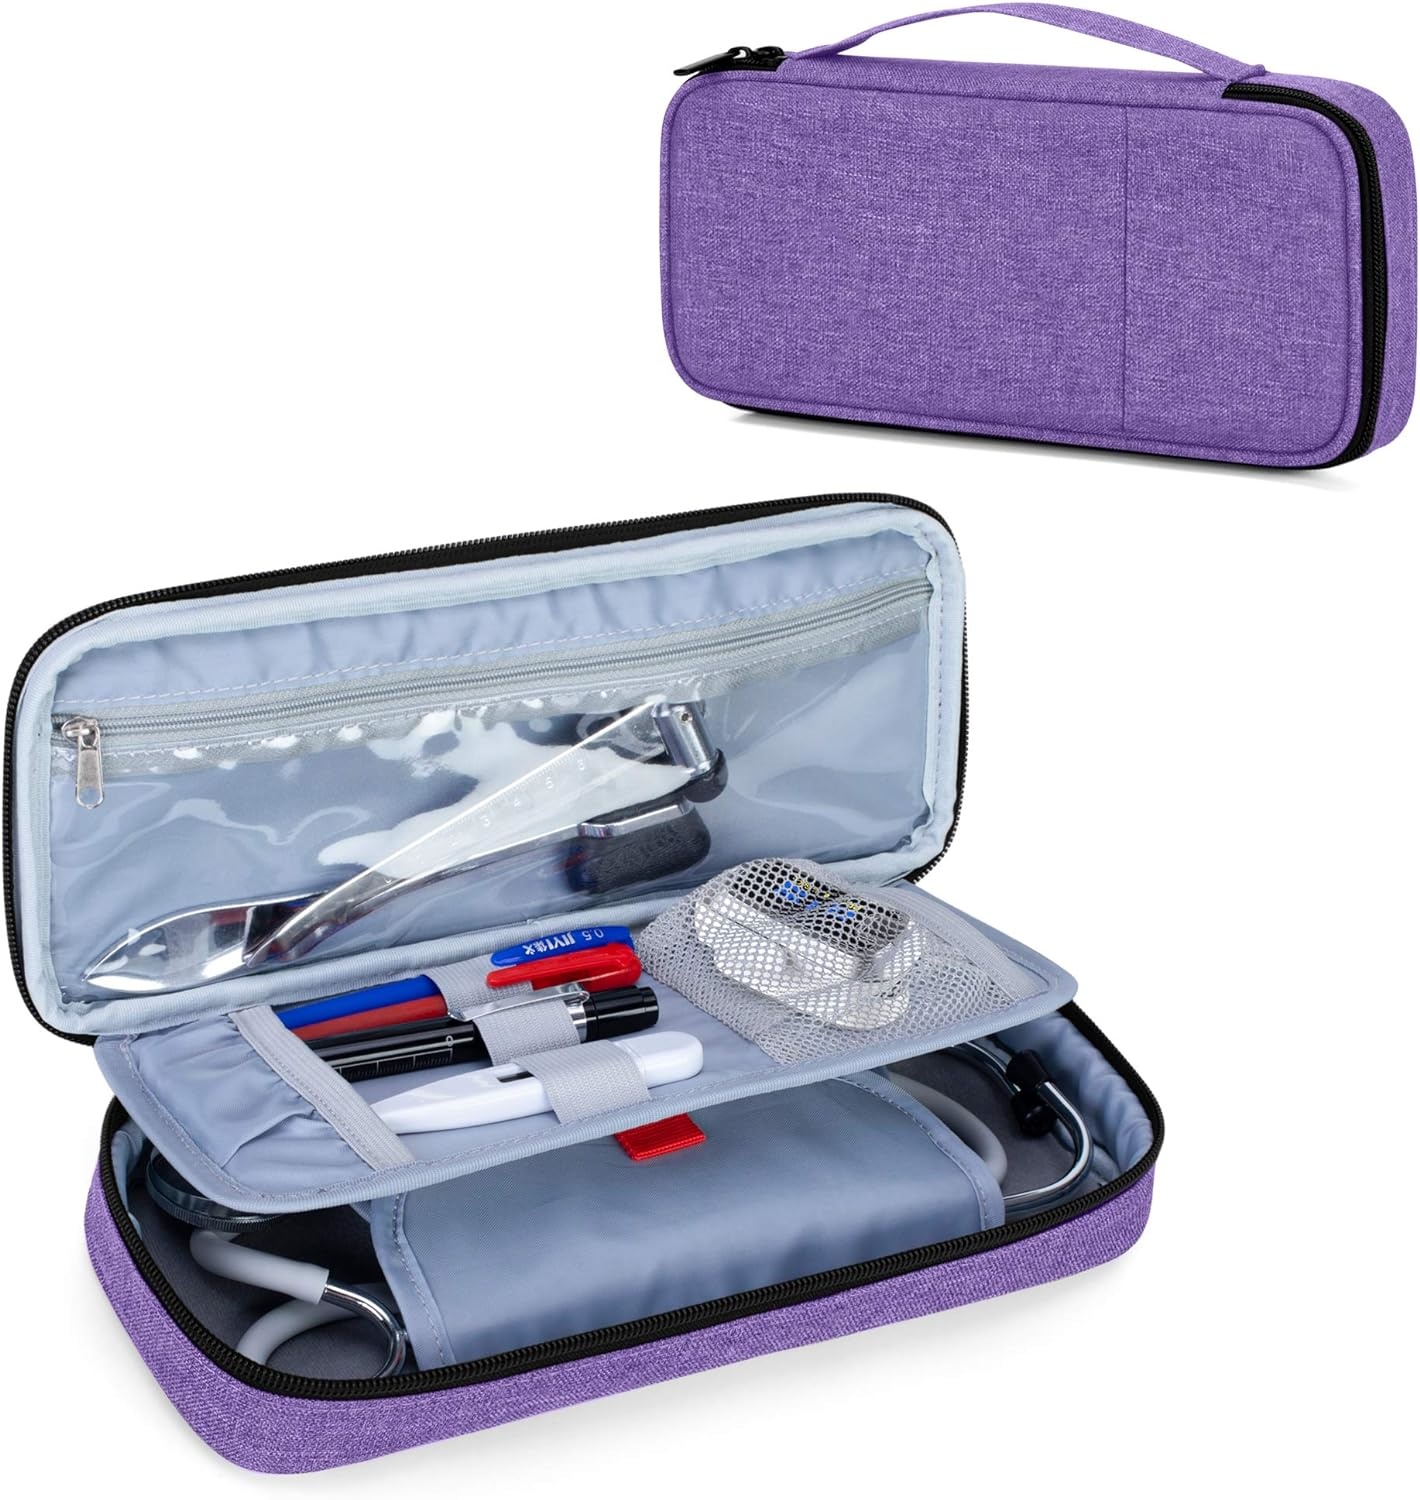 The Stethoscope Case with Inner Divider, Stethoscope Carrying Case Compatible with 3M Littmann/MDF/ADC and Extra Accessories for Nurses, Pediatric Doctor or Medical Students